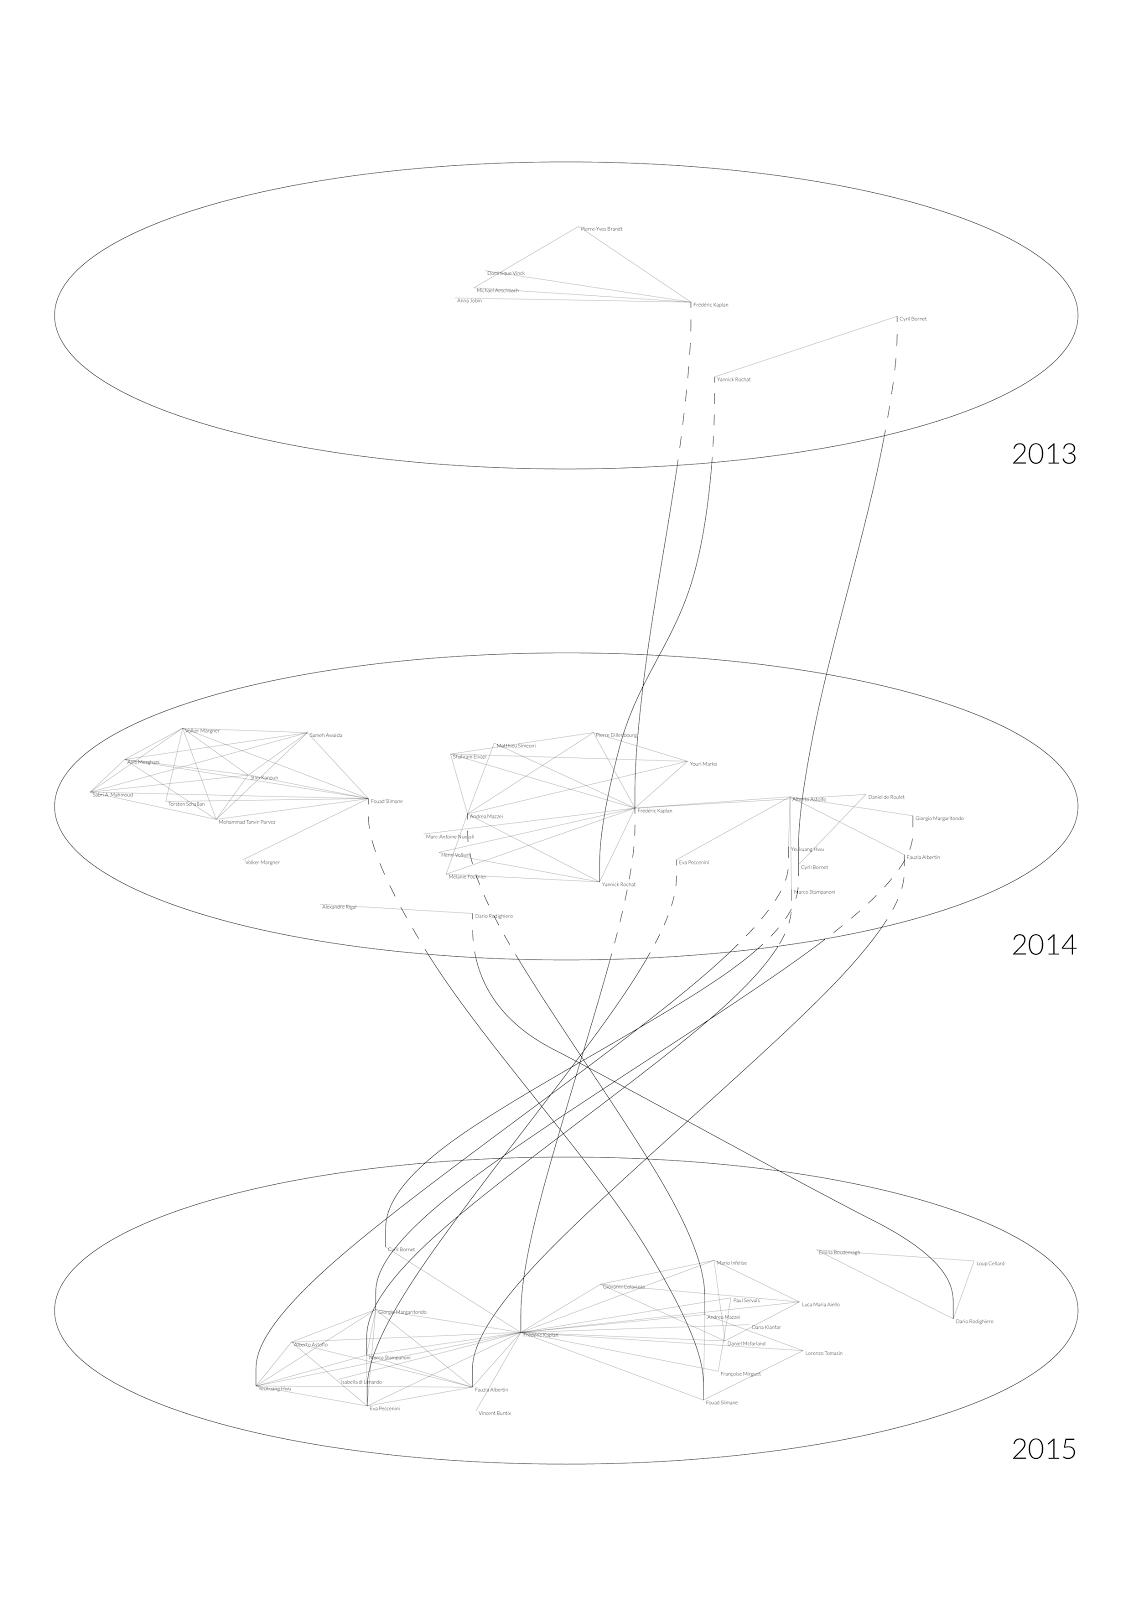 Figure 3. The DHLAB network is divided into years. Each trajectory represents an author who published during the years, tracing his continuity